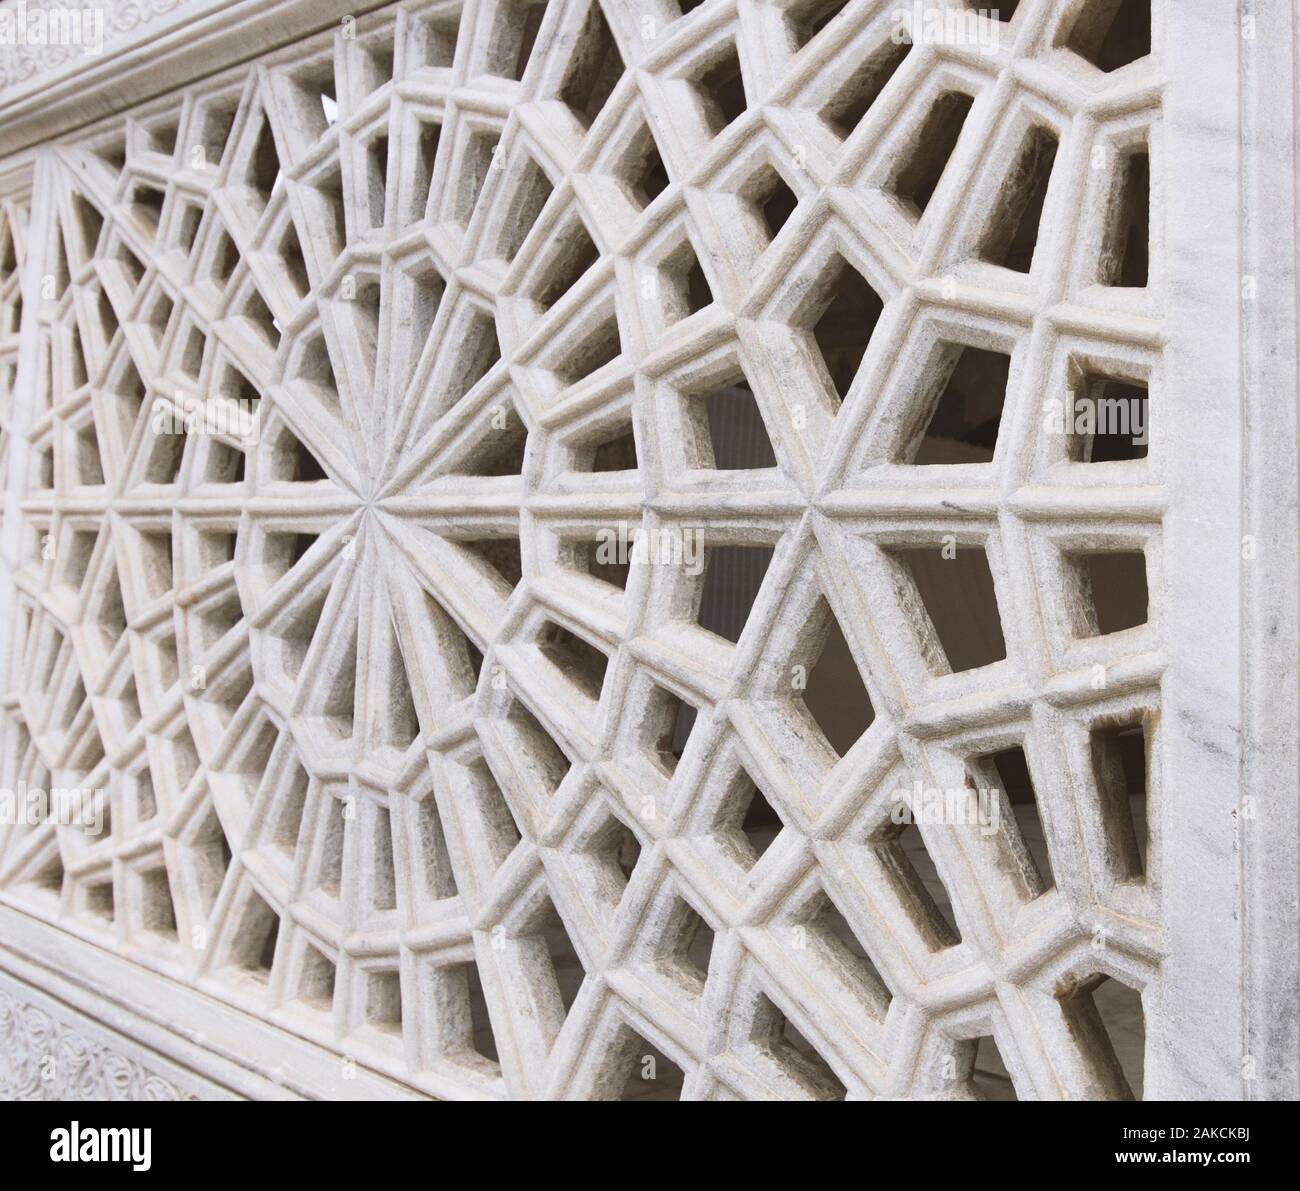 Close up of Islamic stone pattern architectural element resembling dharma wheel of Buddhism. Stock Photo